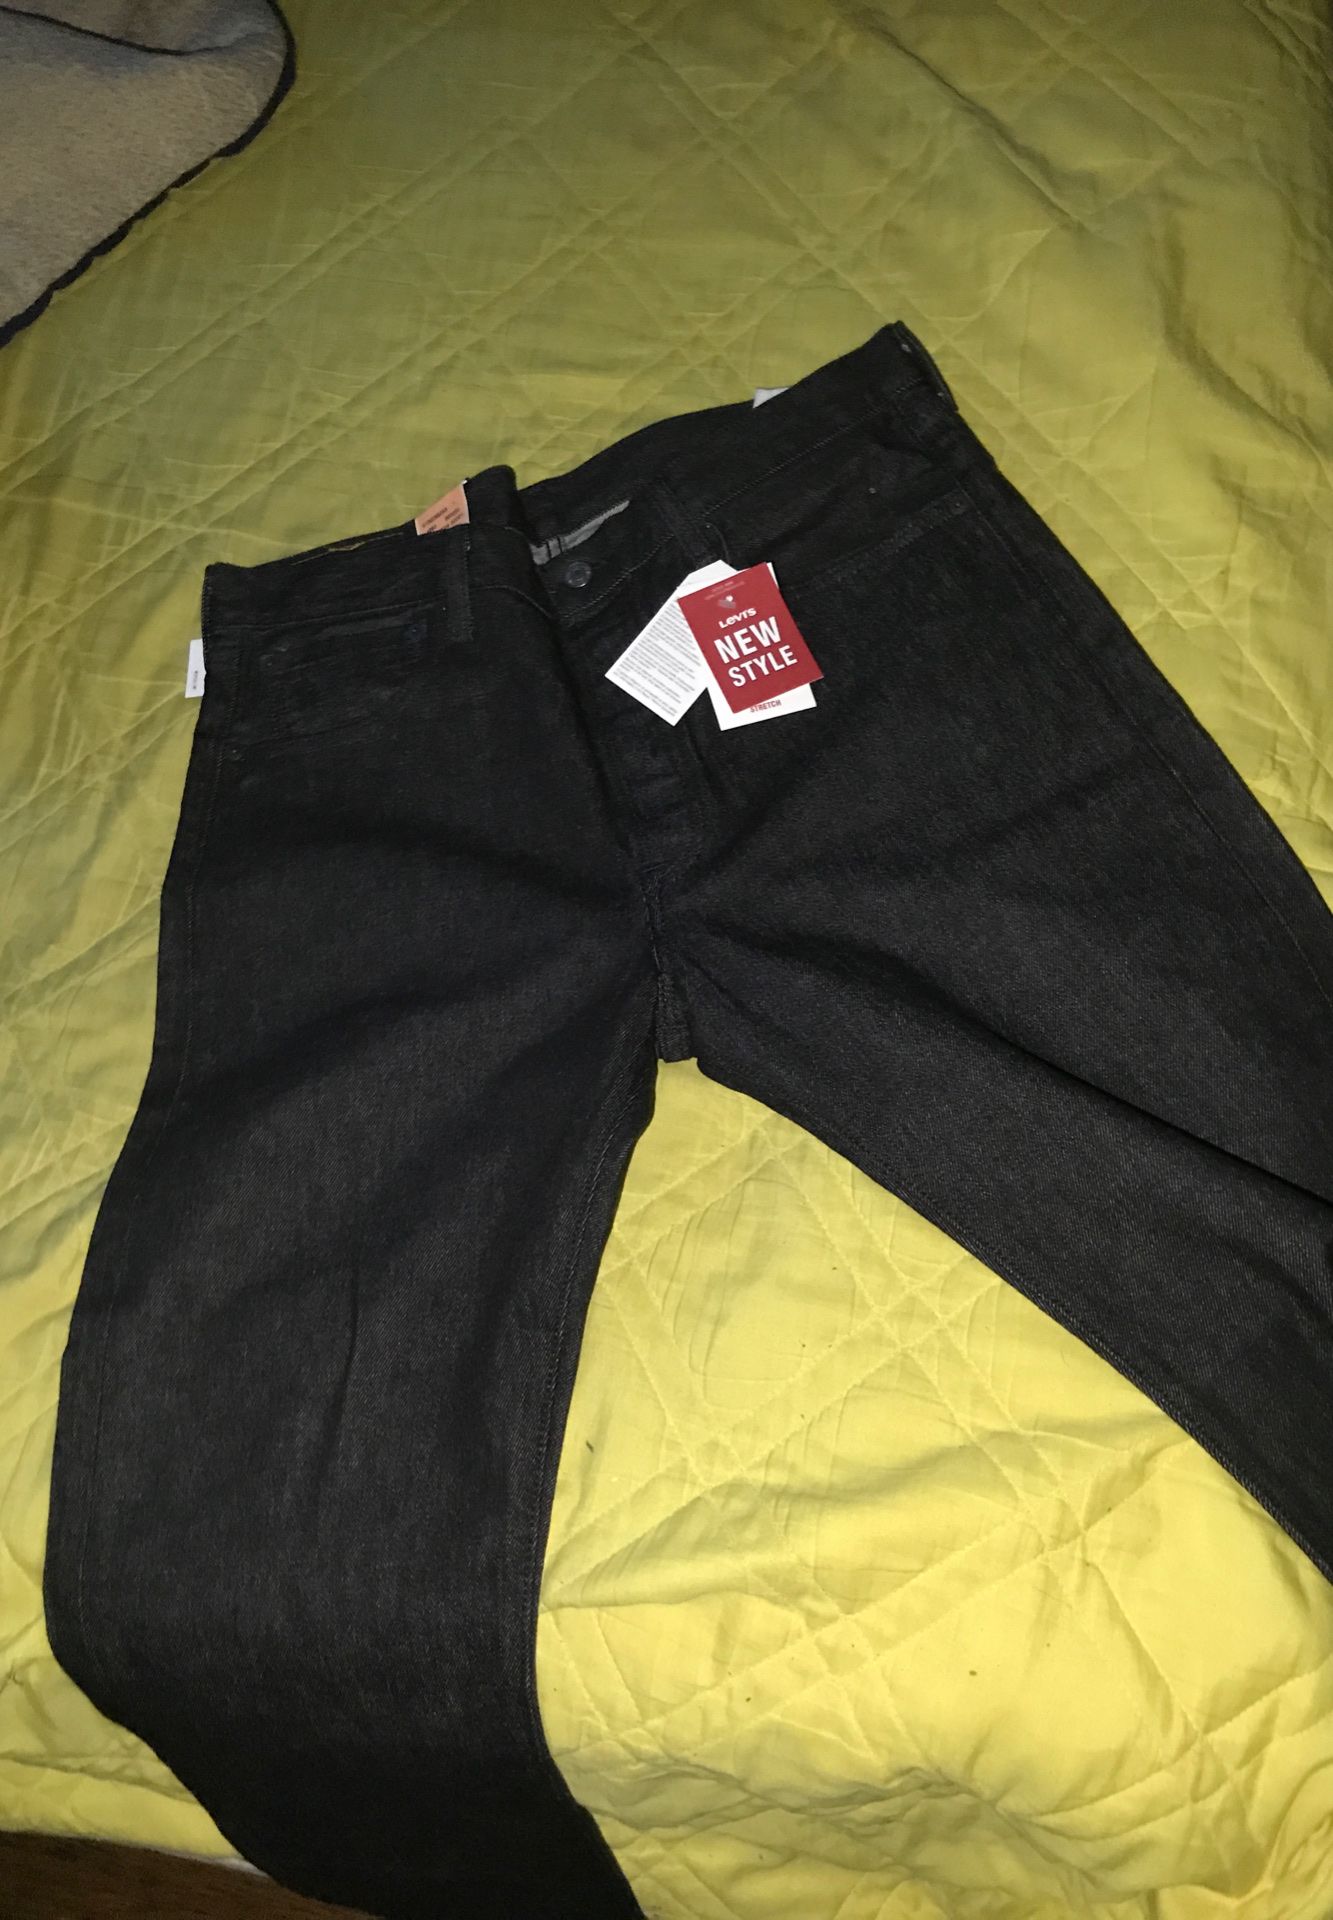 Levi pants *brand new never used”